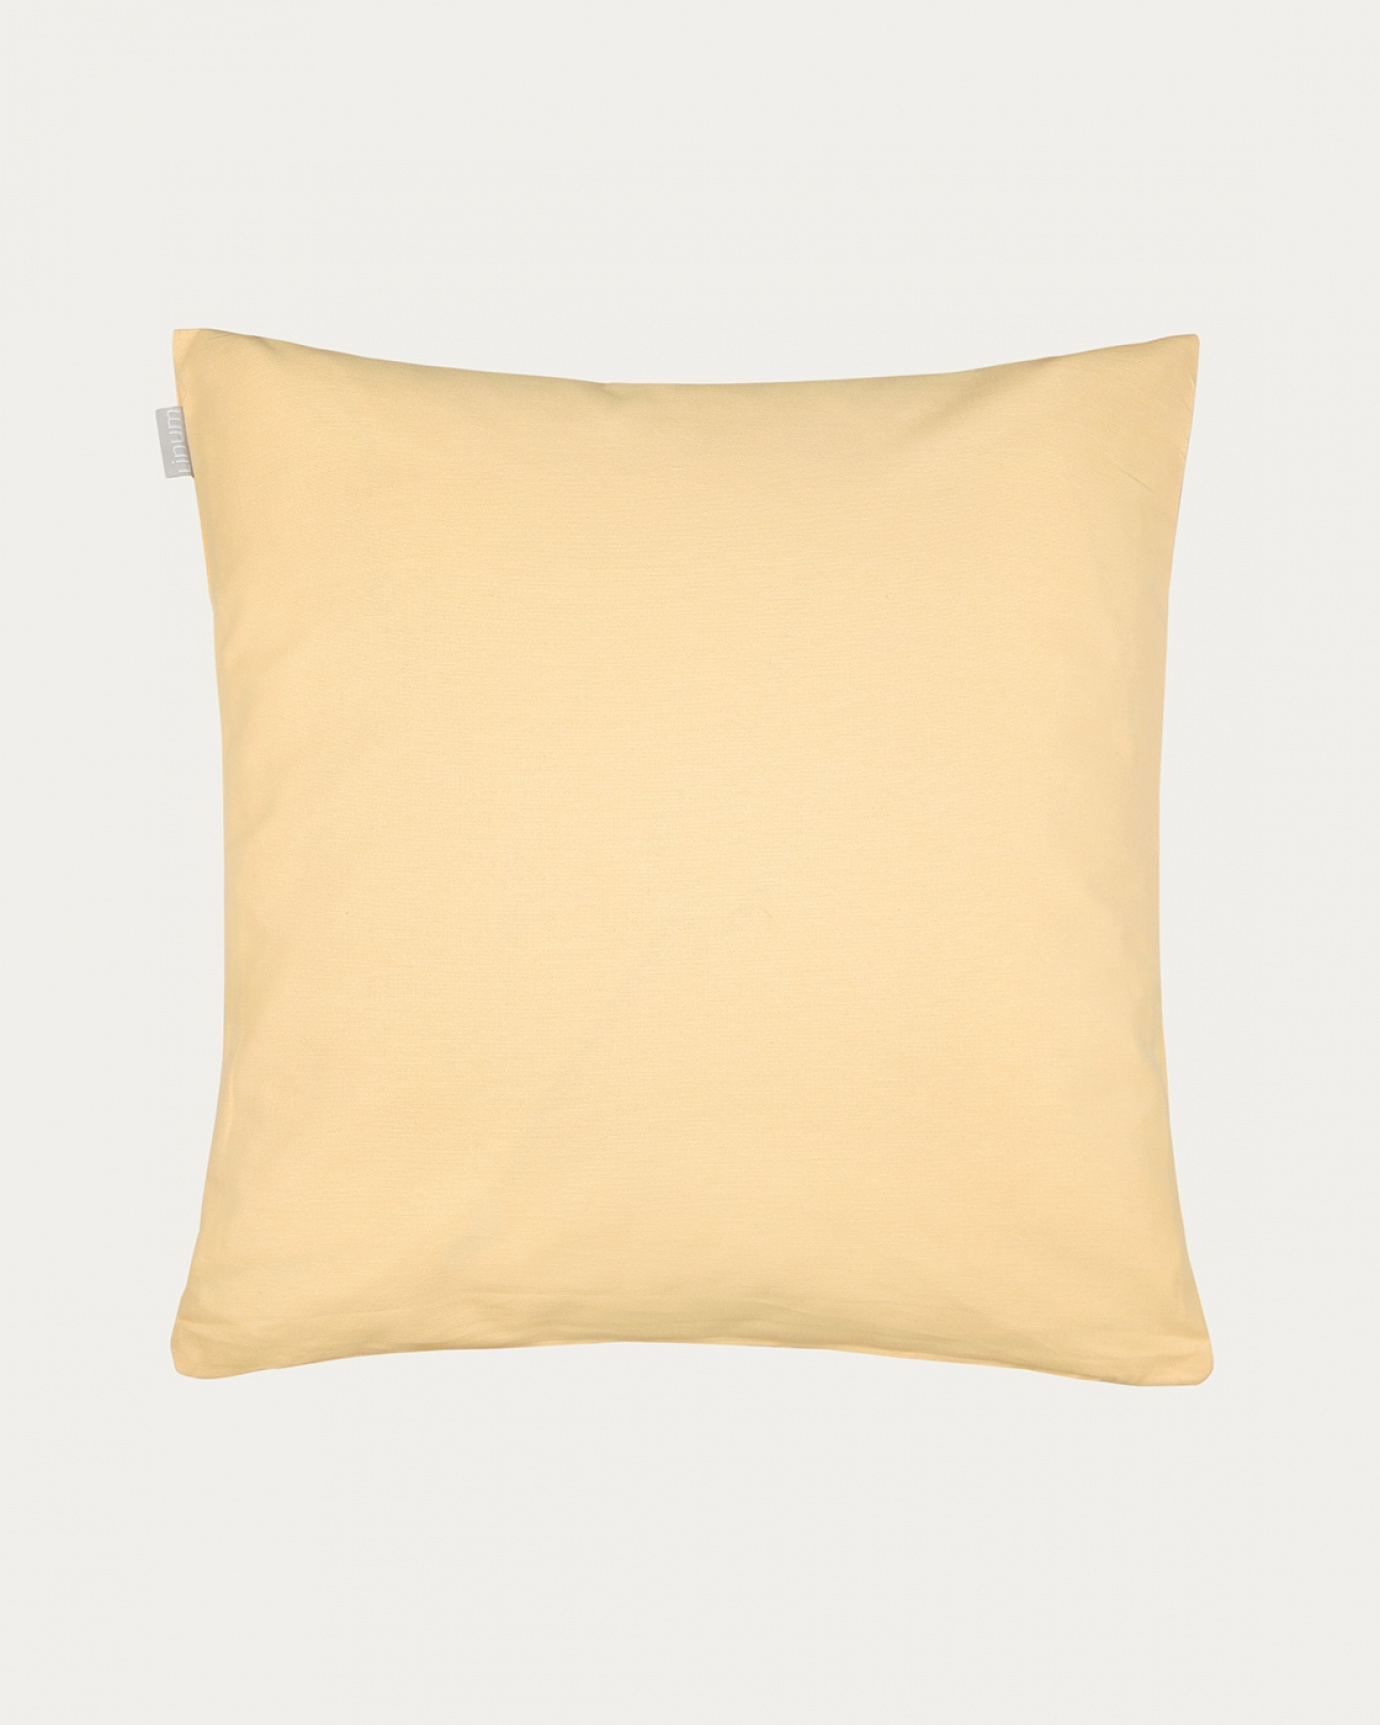 Product image light peach yellow ANNABELL cushion cover made of soft cotton from LINUM DESIGN. Size 50x50 cm.